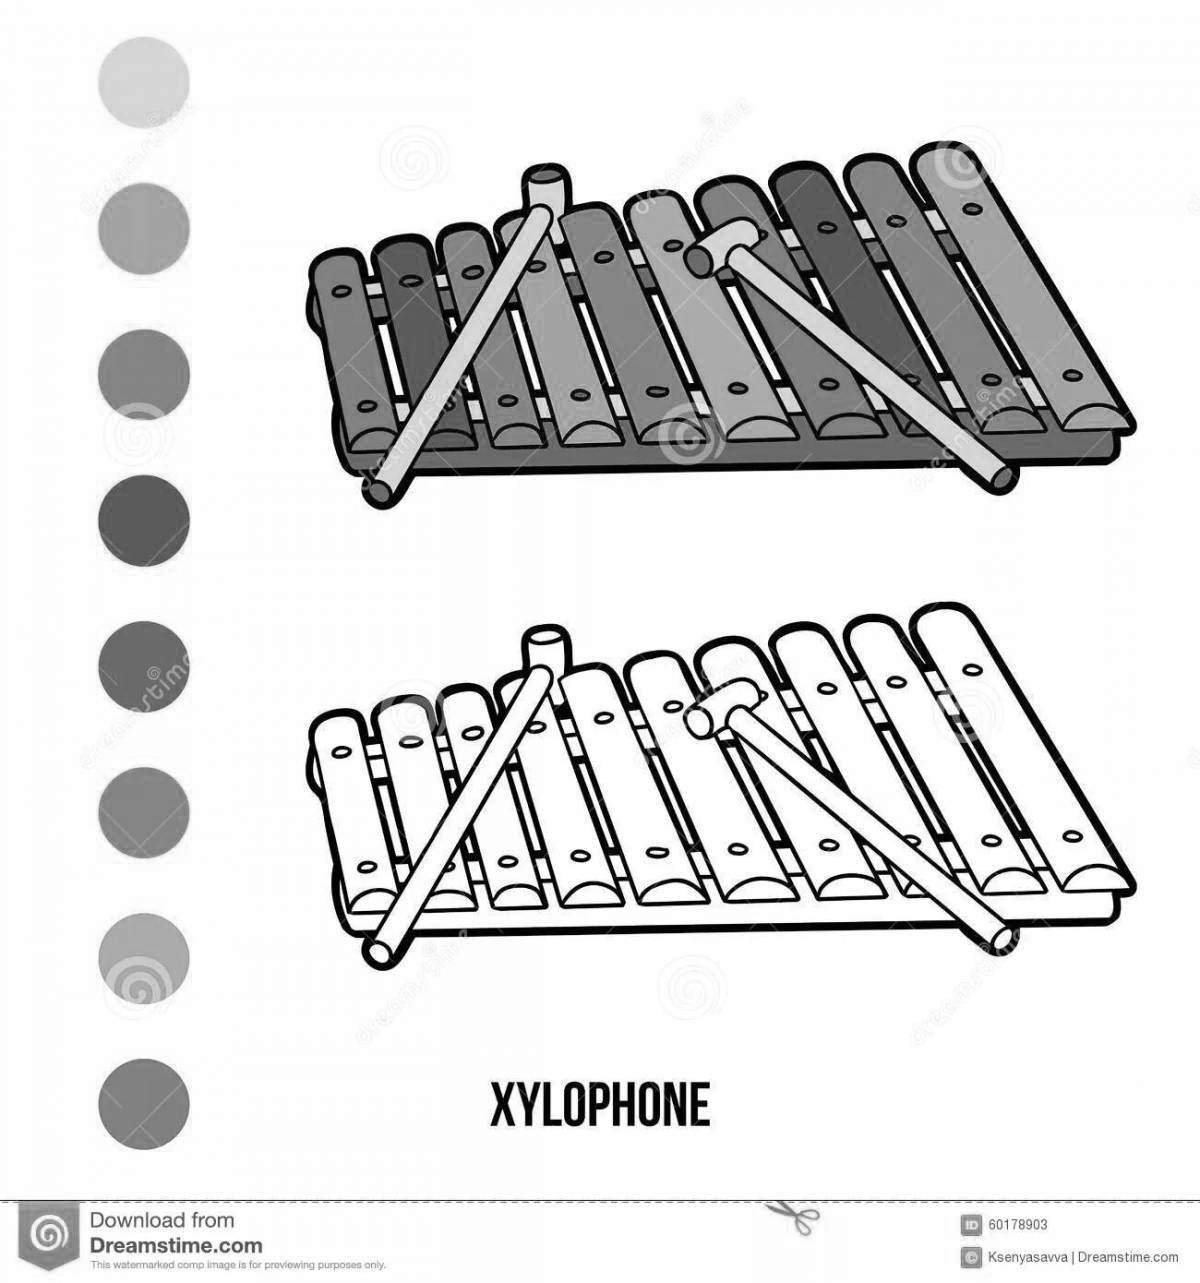 Children's xylophone coloring book